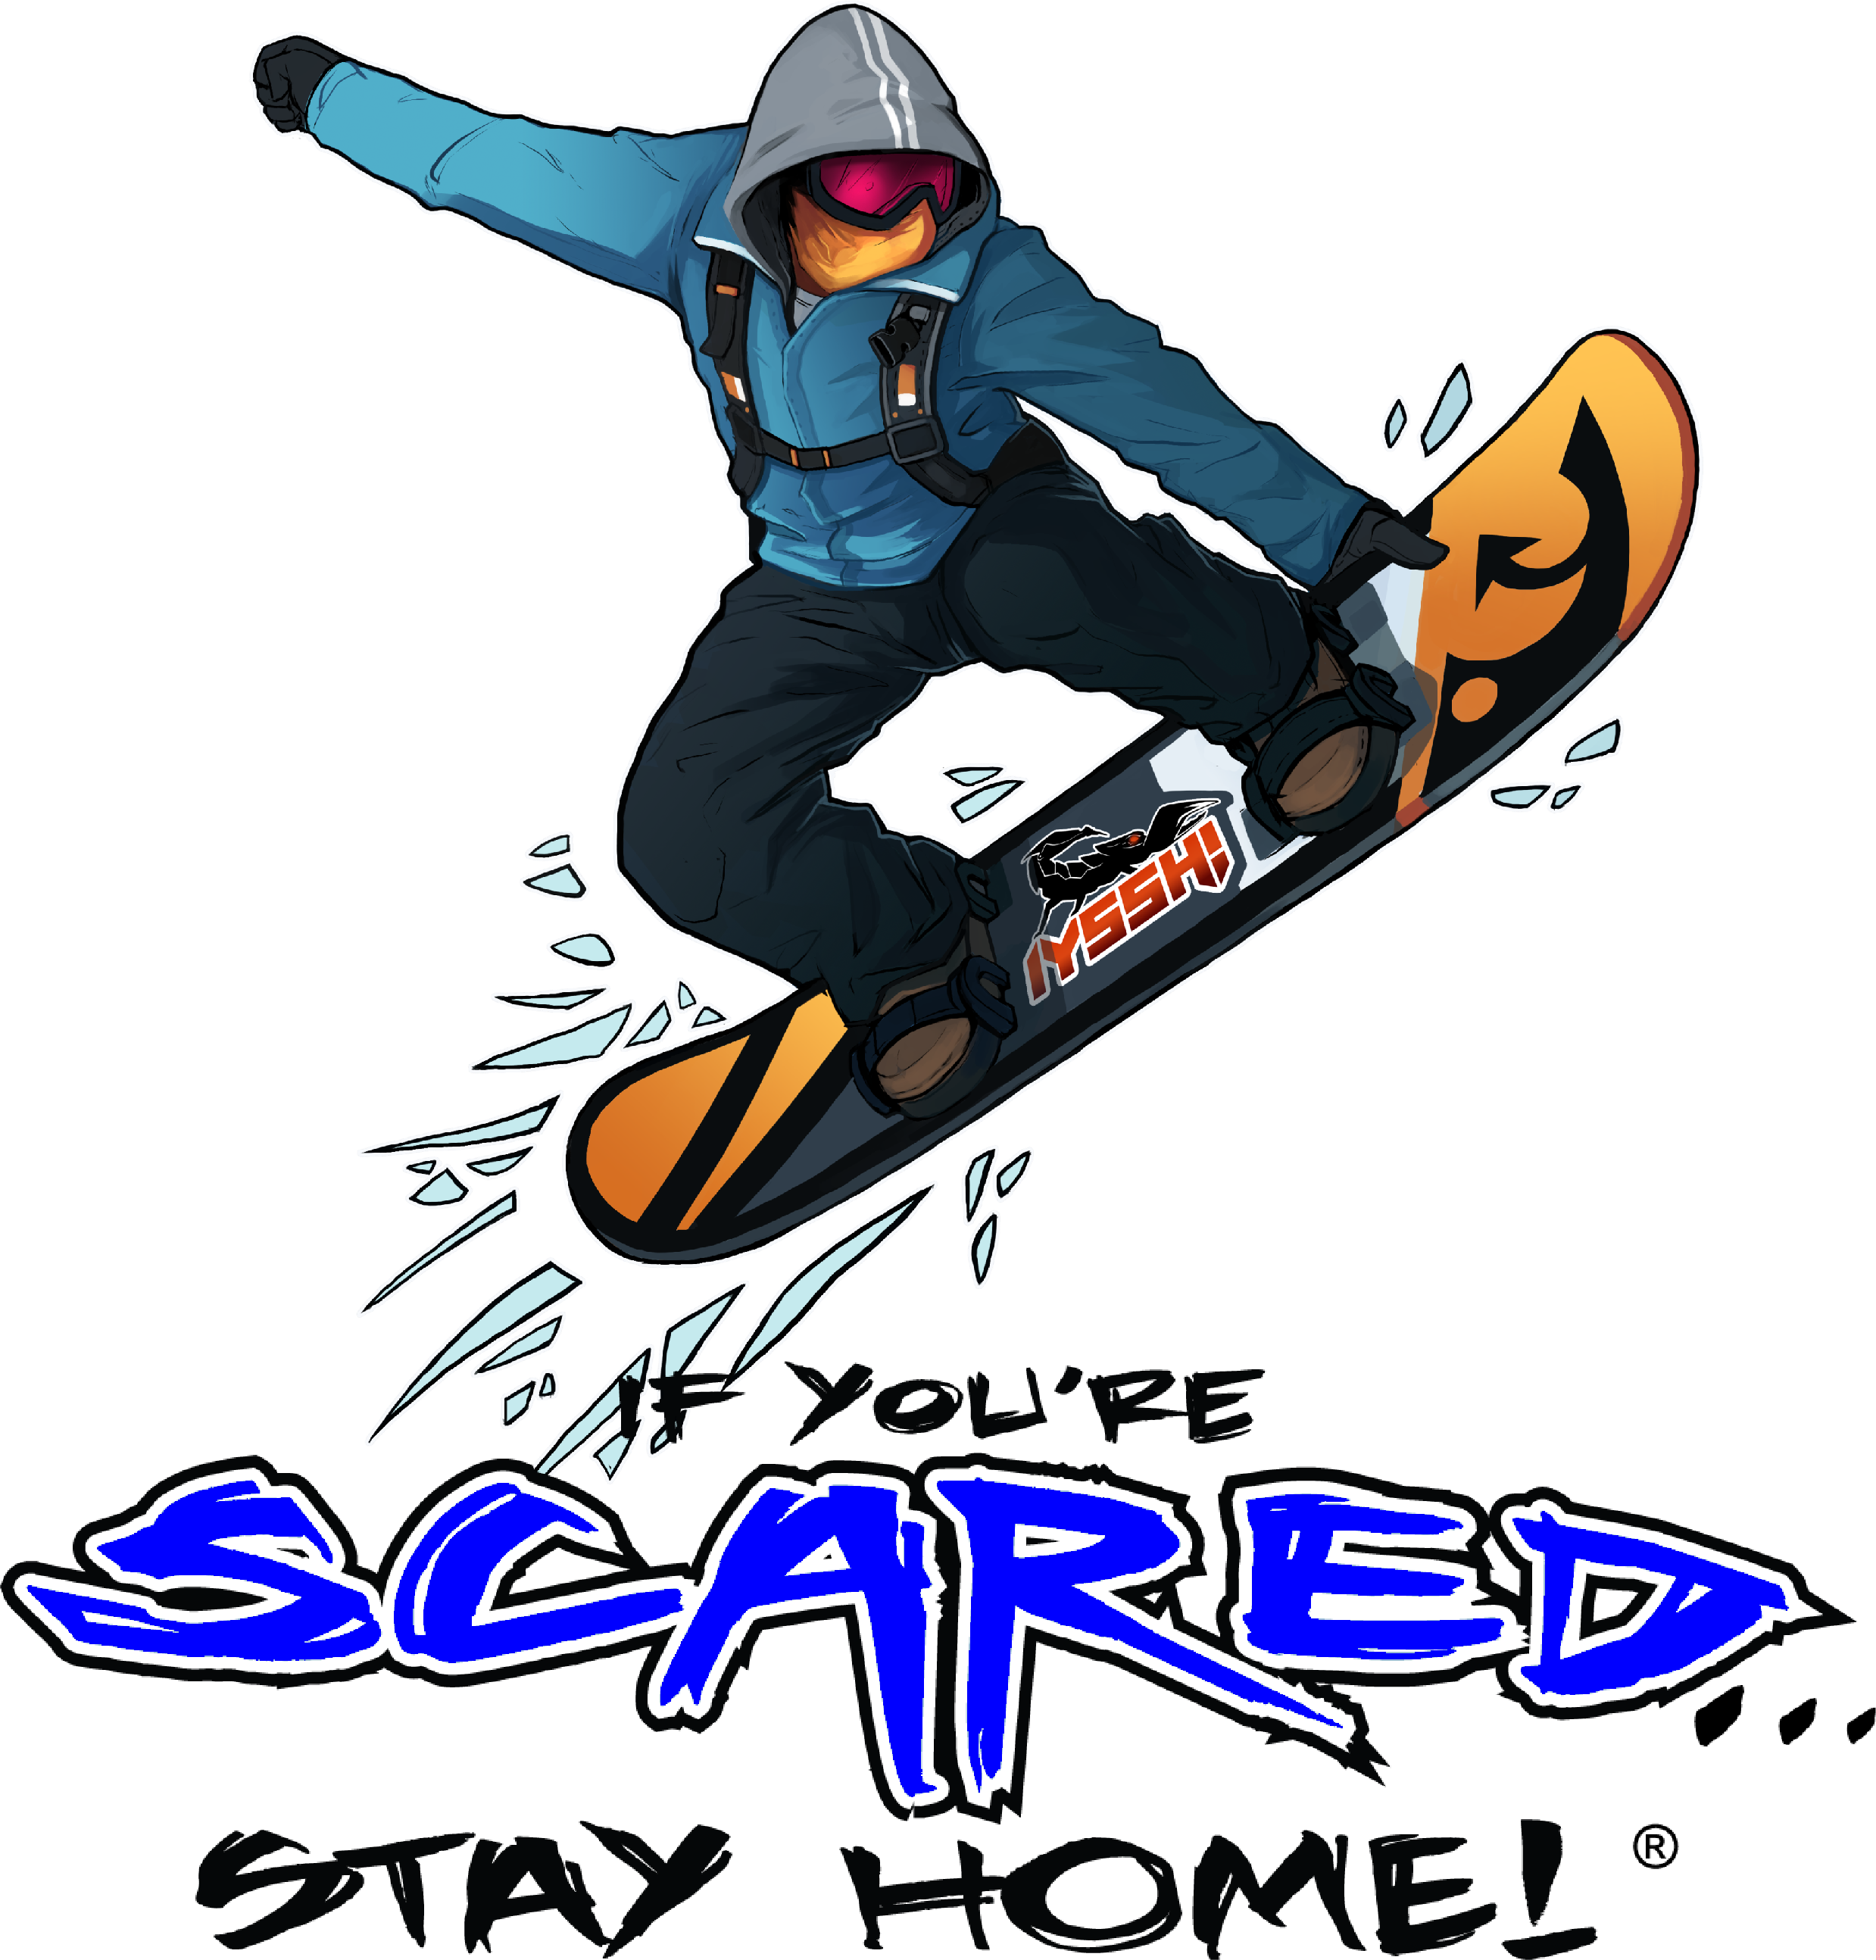 A Person On A Snowboard